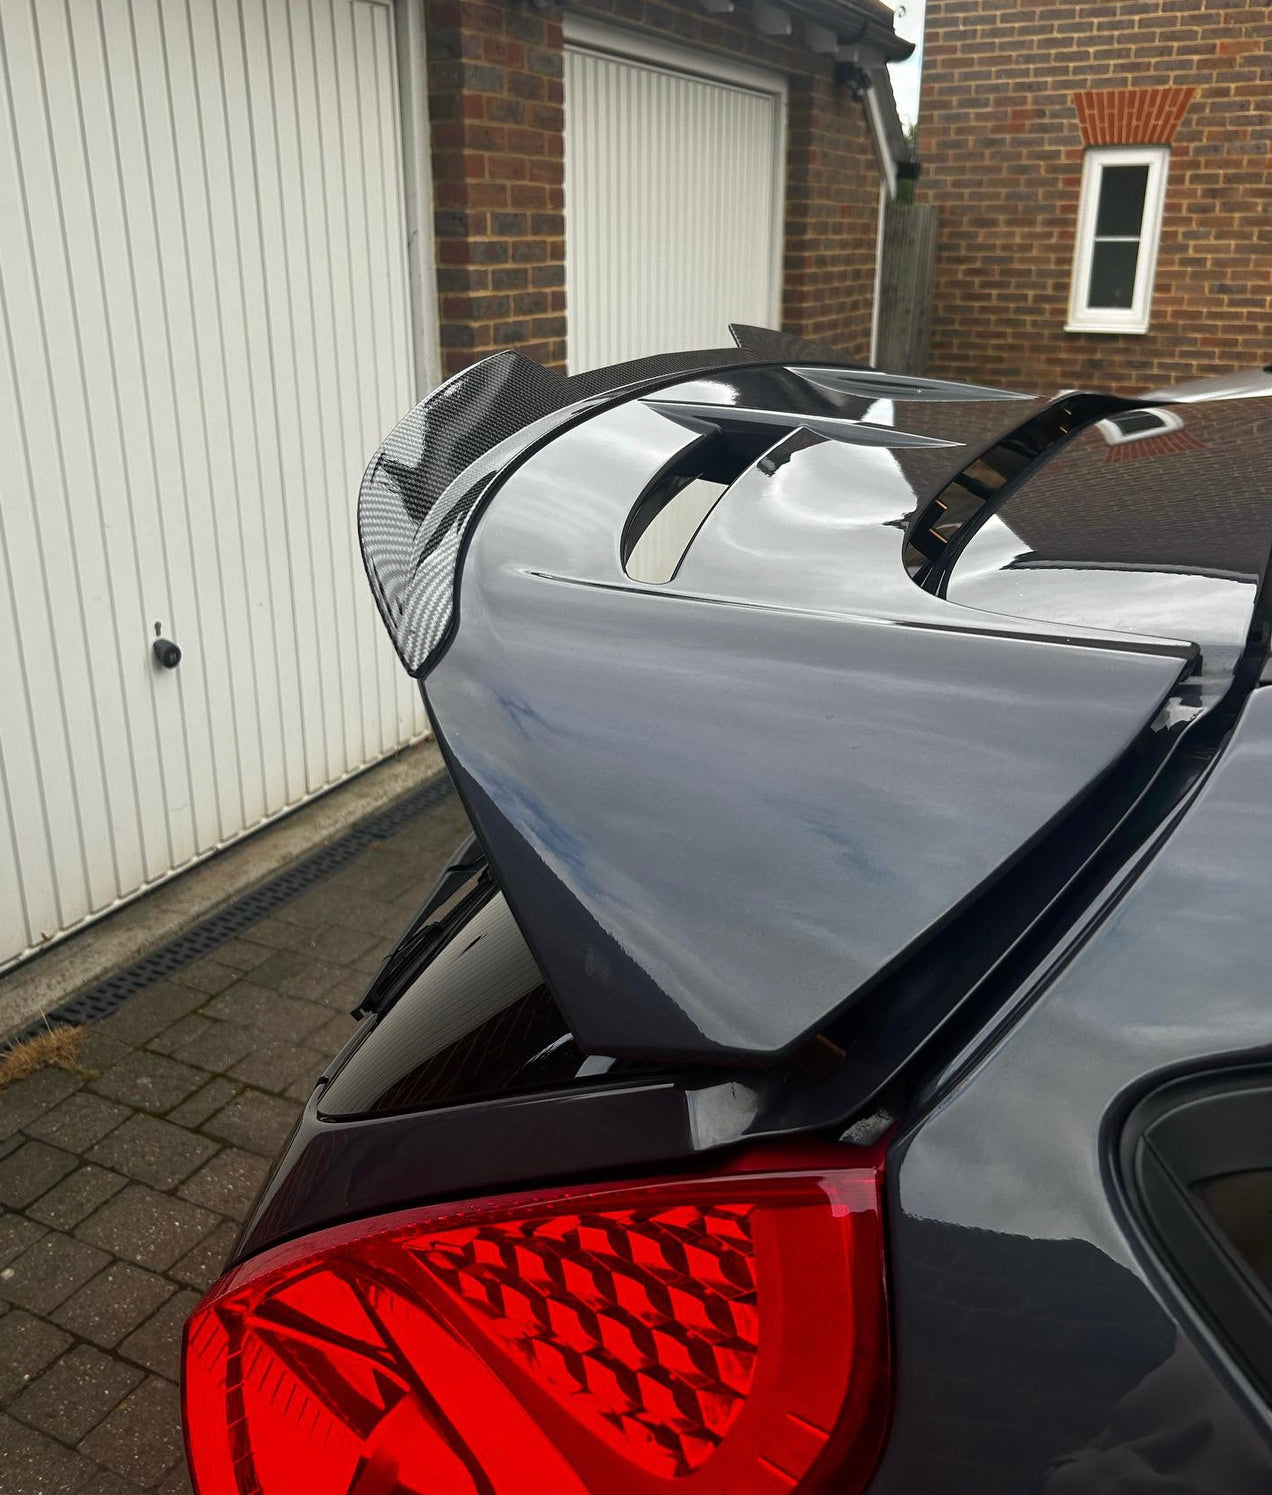 Ford Fiesta MK7 Spoiler Gloss Black ST Style – Carbon Accents